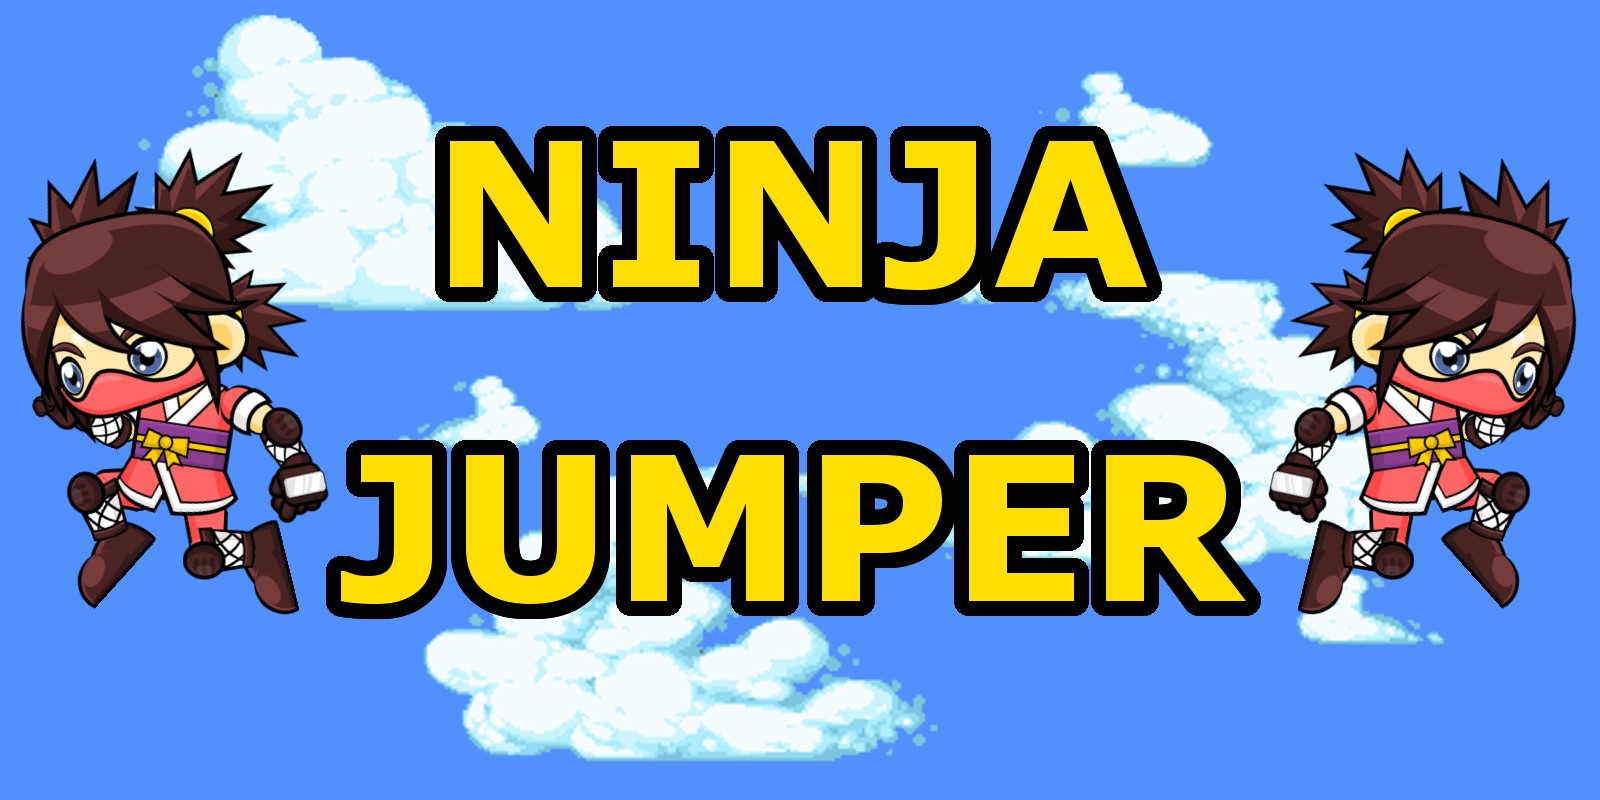 Ninja Jumper - Android Game Source Code by Tutstecmobile | Codester